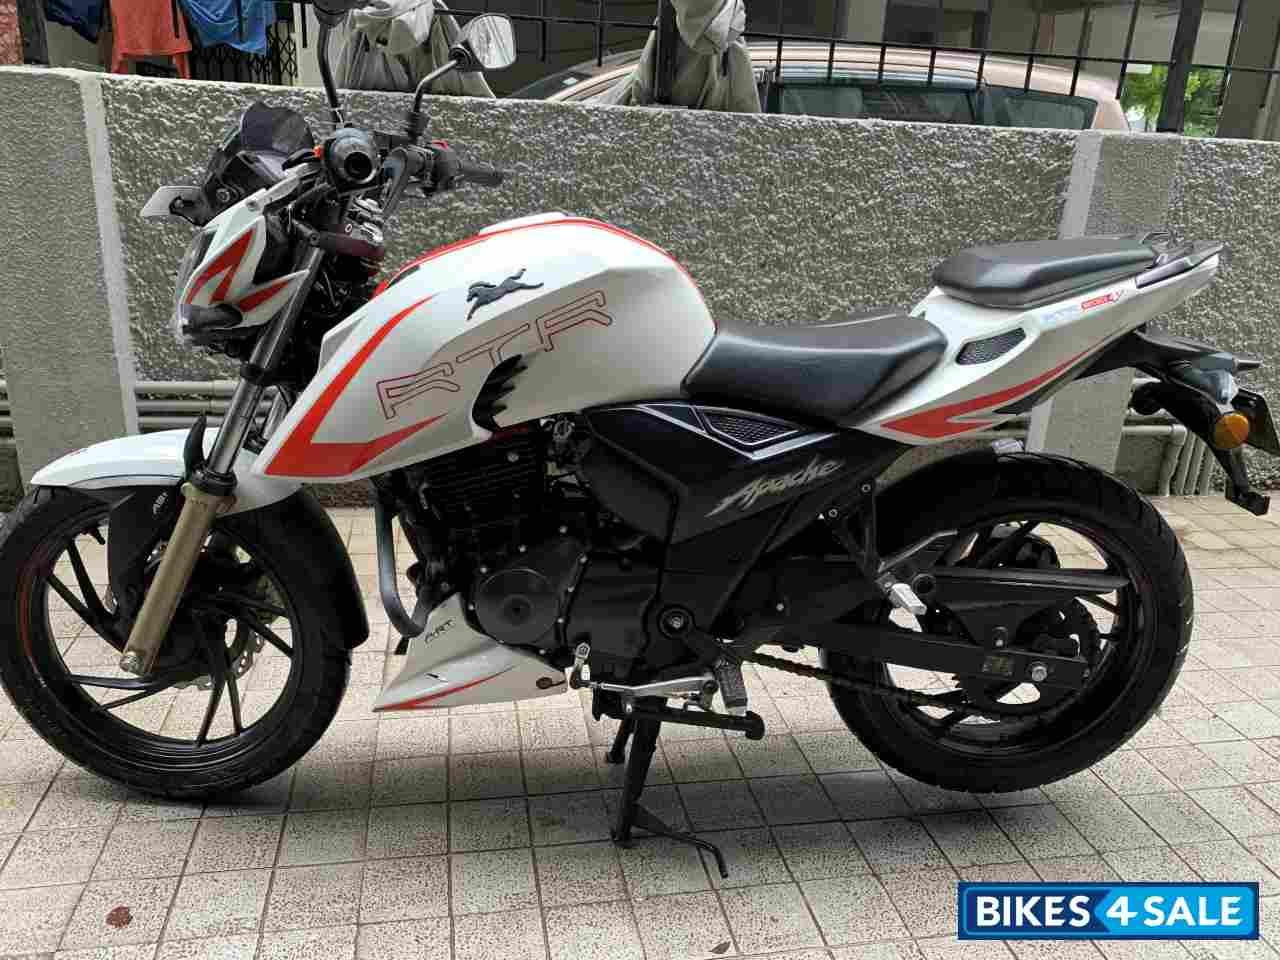 Used 2018 Model Tvs Apache Rtr 200 4v Abs Race Edition 2 0 For